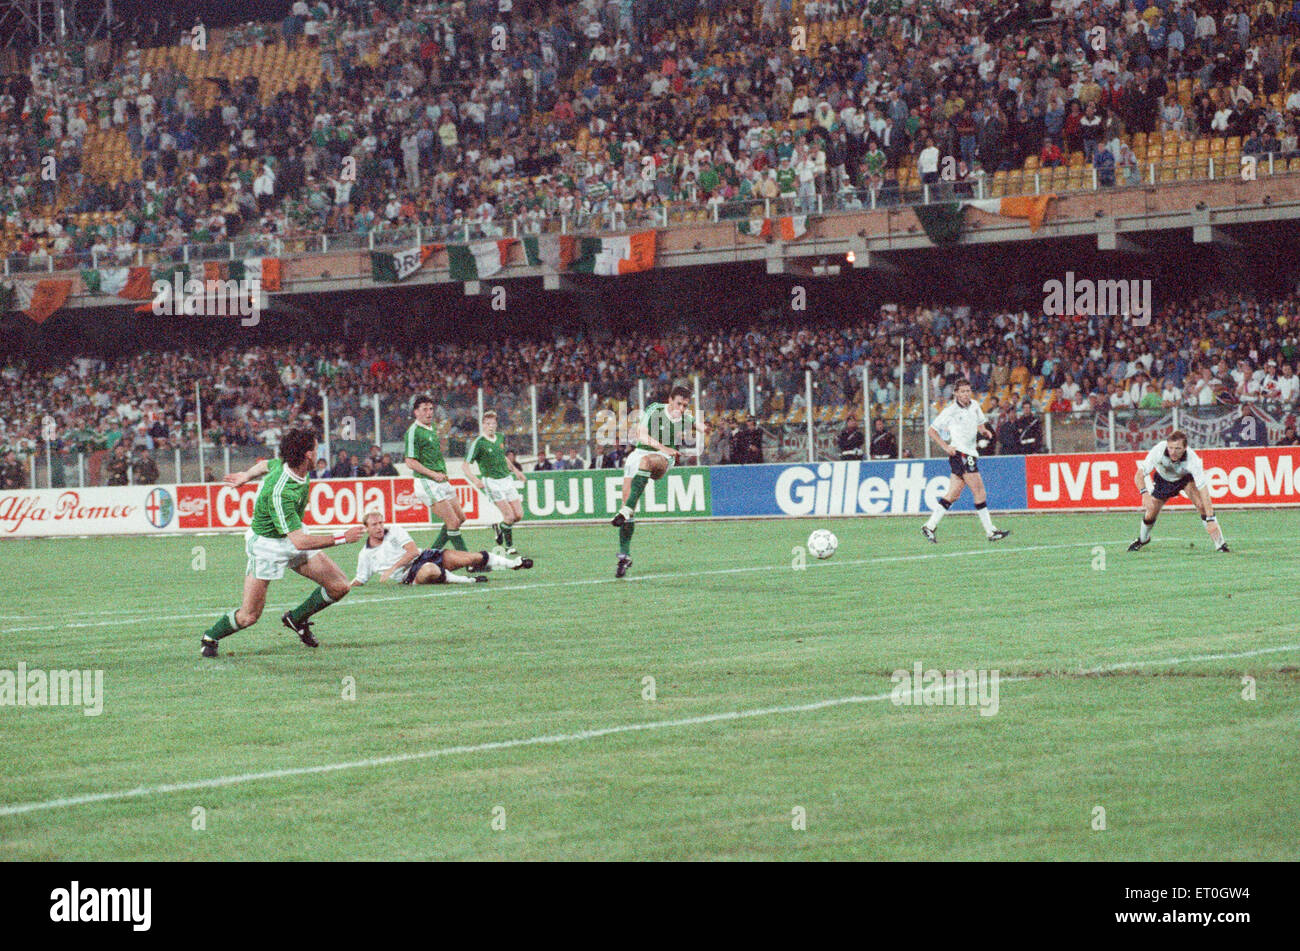 World Cup Group F match at the Stadio Sant'Elia in Cagliari, Italy. England 1 v Republic of Ireland 1. Kevin Sheedy crashes in the equaliser for Republic of Ireland with a left foot strike from the edge of the penalty area watched by Steve McMahon on the ground. 11th June 1990. Stock Photo